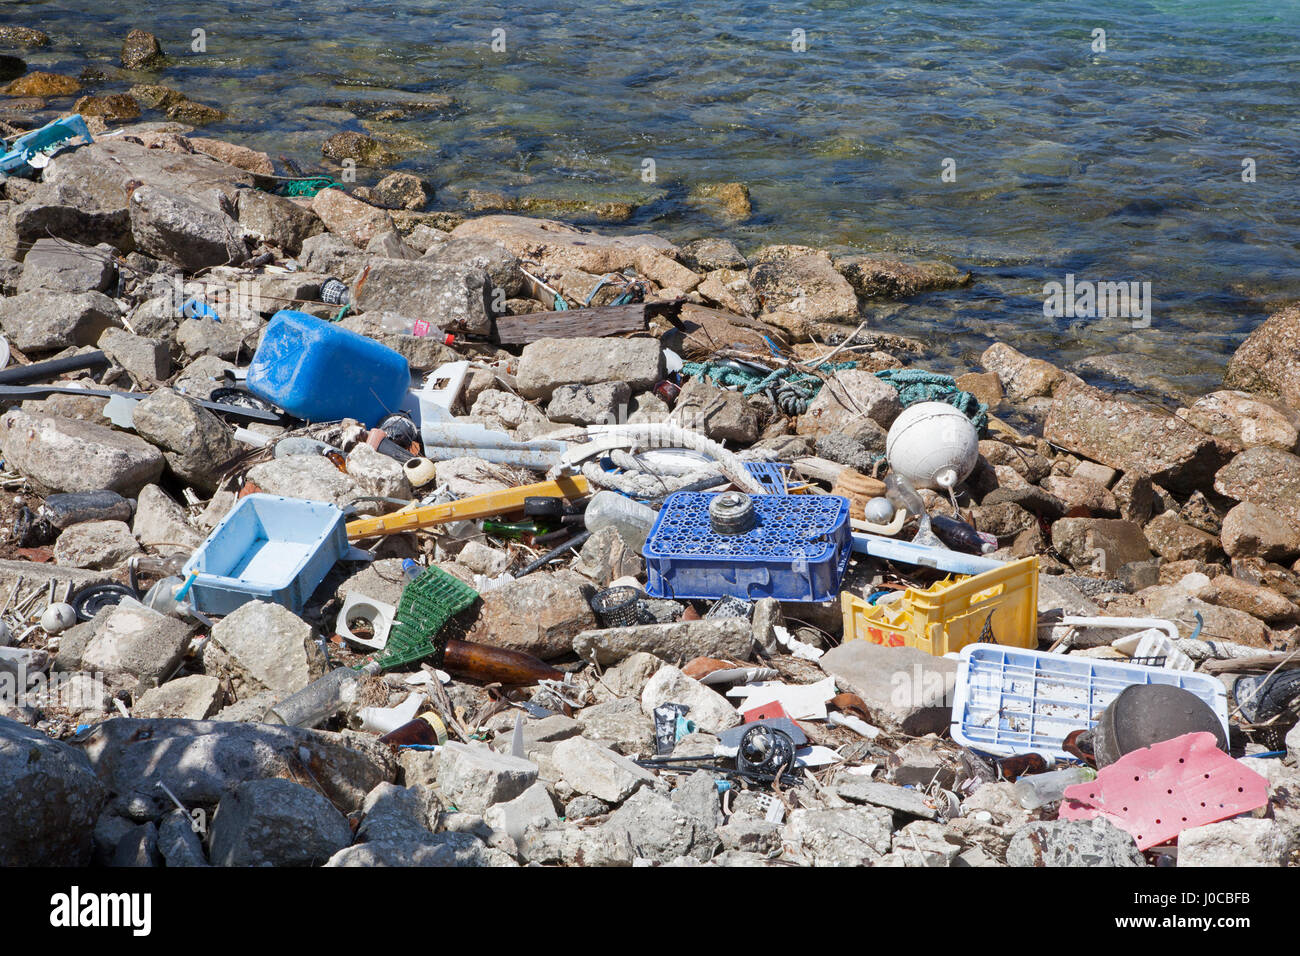 Plastic trash and glass marine debris washed ashore in the harbor of a North Pacific island Stock Photo